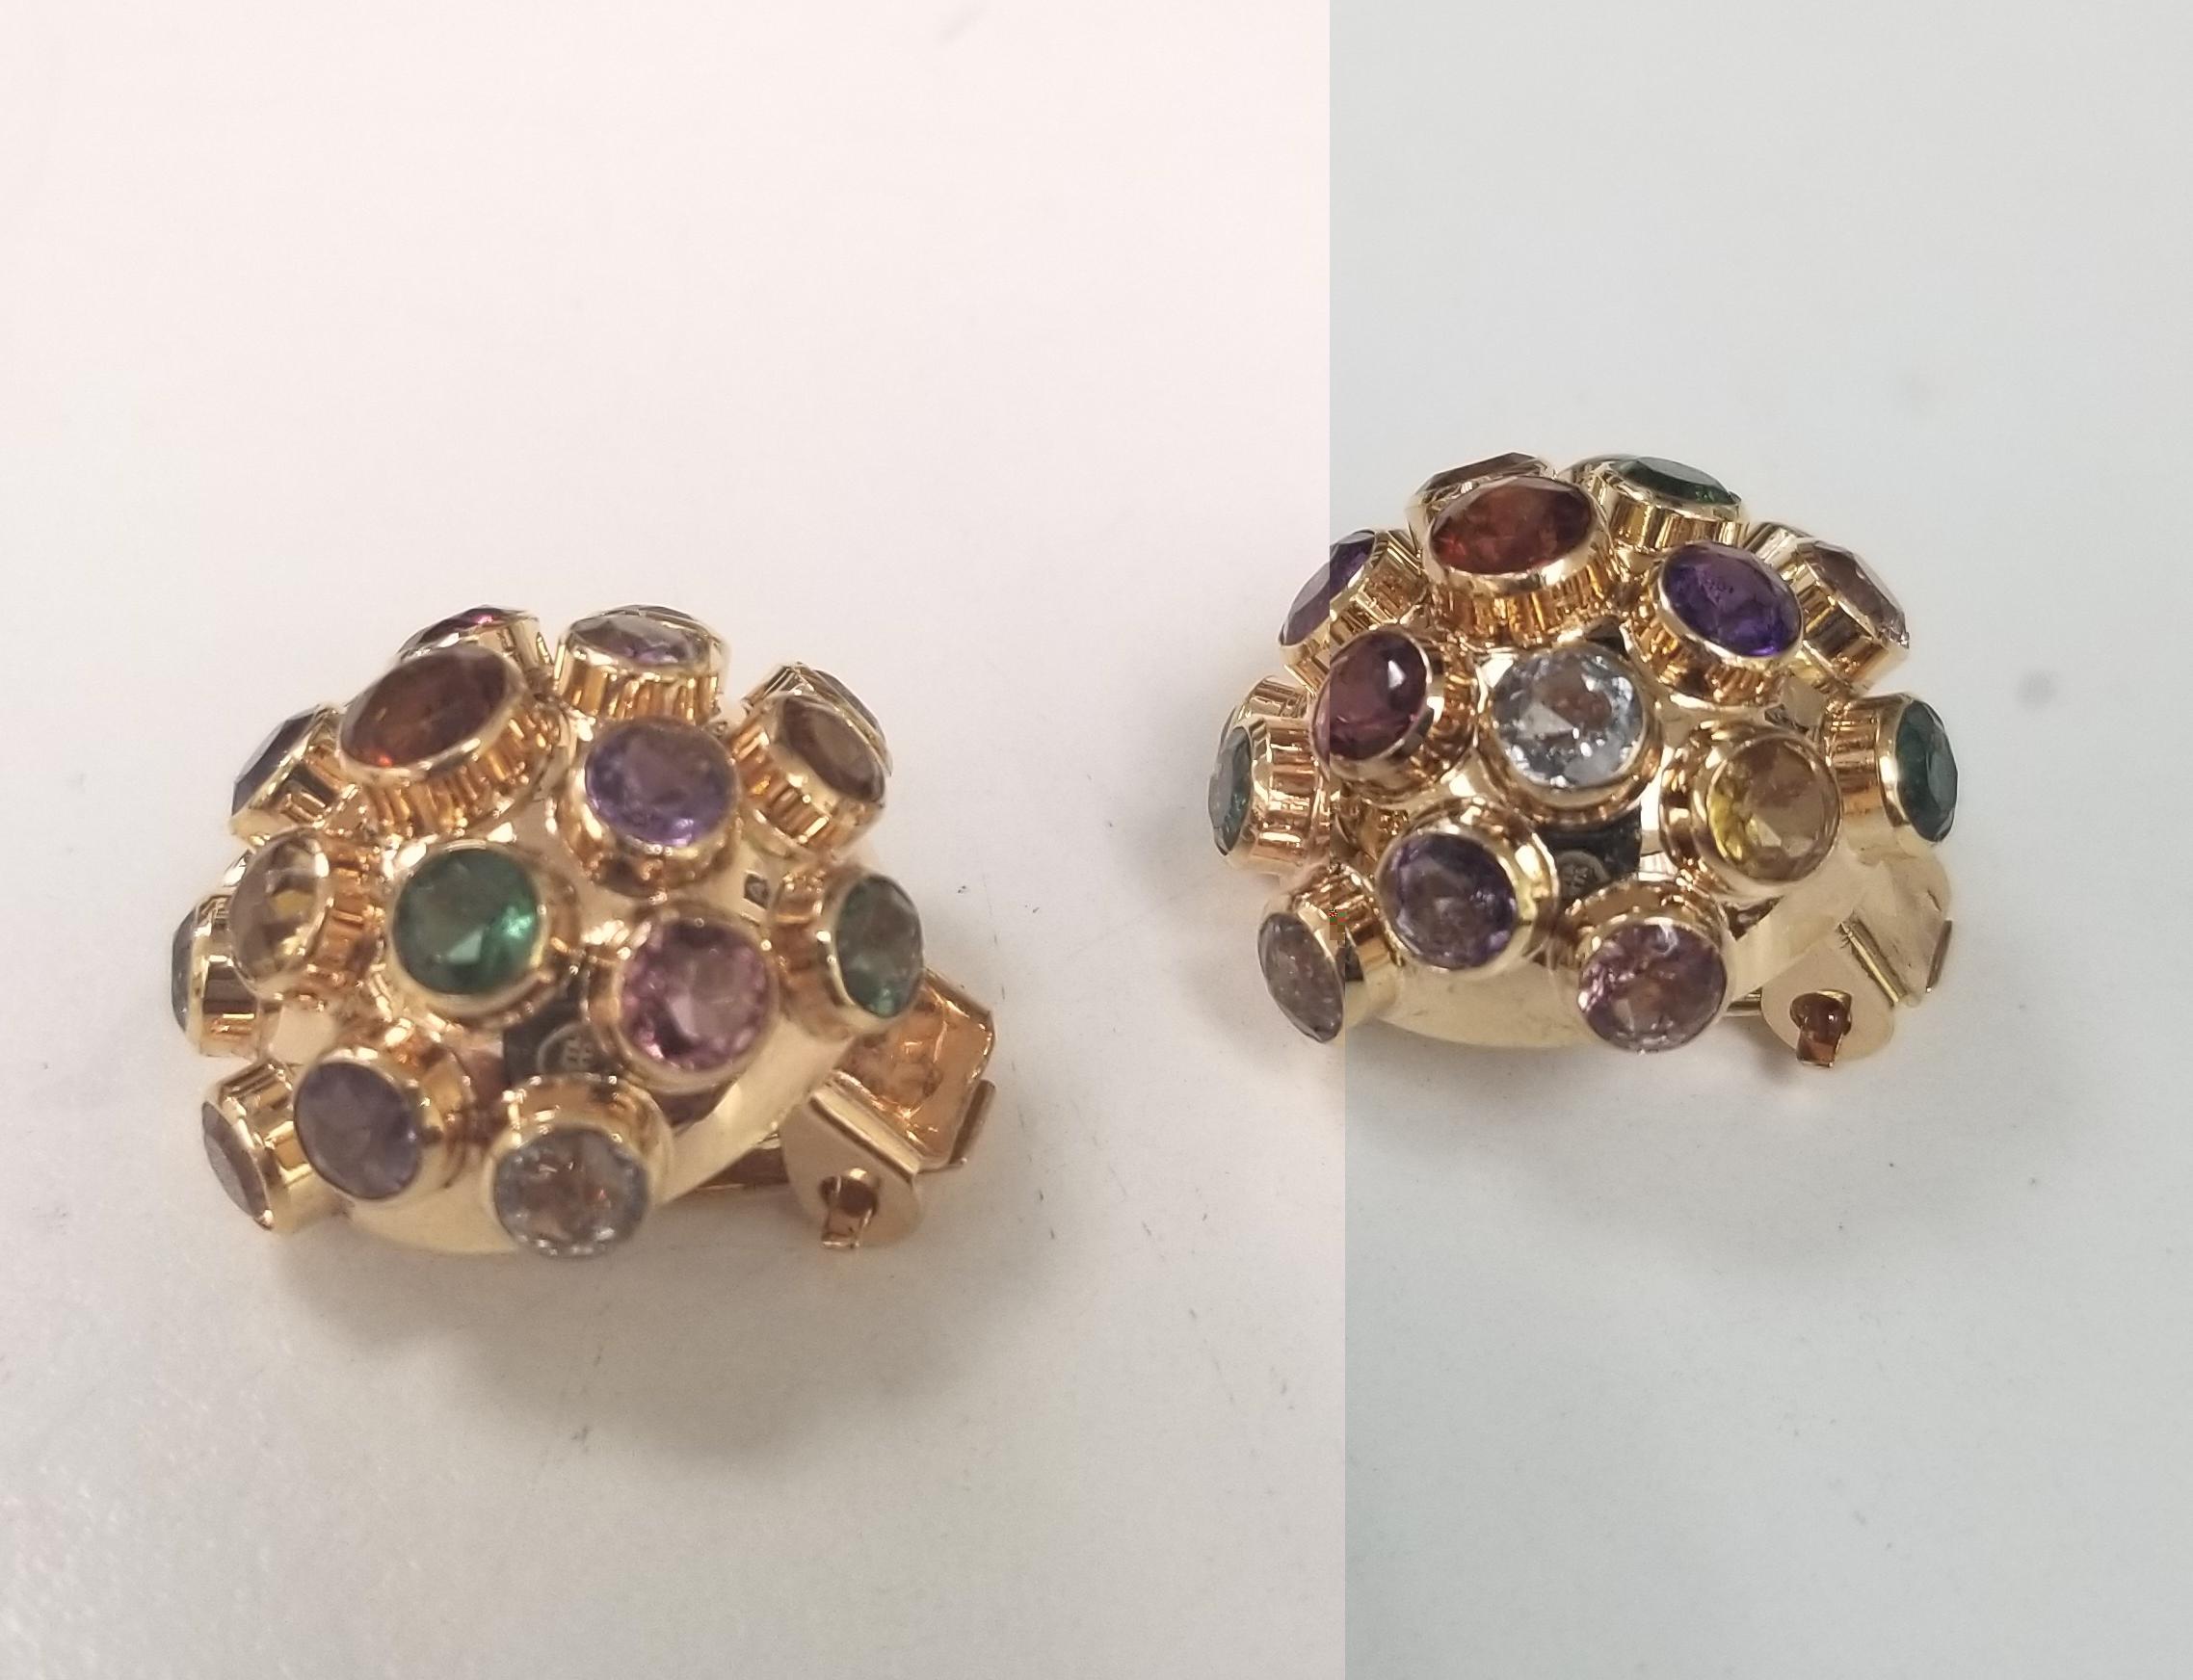 A vintage Sputnik style ring in 18 karat rose gold. Featuring a plethora of gemstones including 19 stones Pink and Green tourmaline, Amethyst, Citrine, Garnet, Aquamarine, and more this is a fantastic example of an original H. Stern Sputnik earring